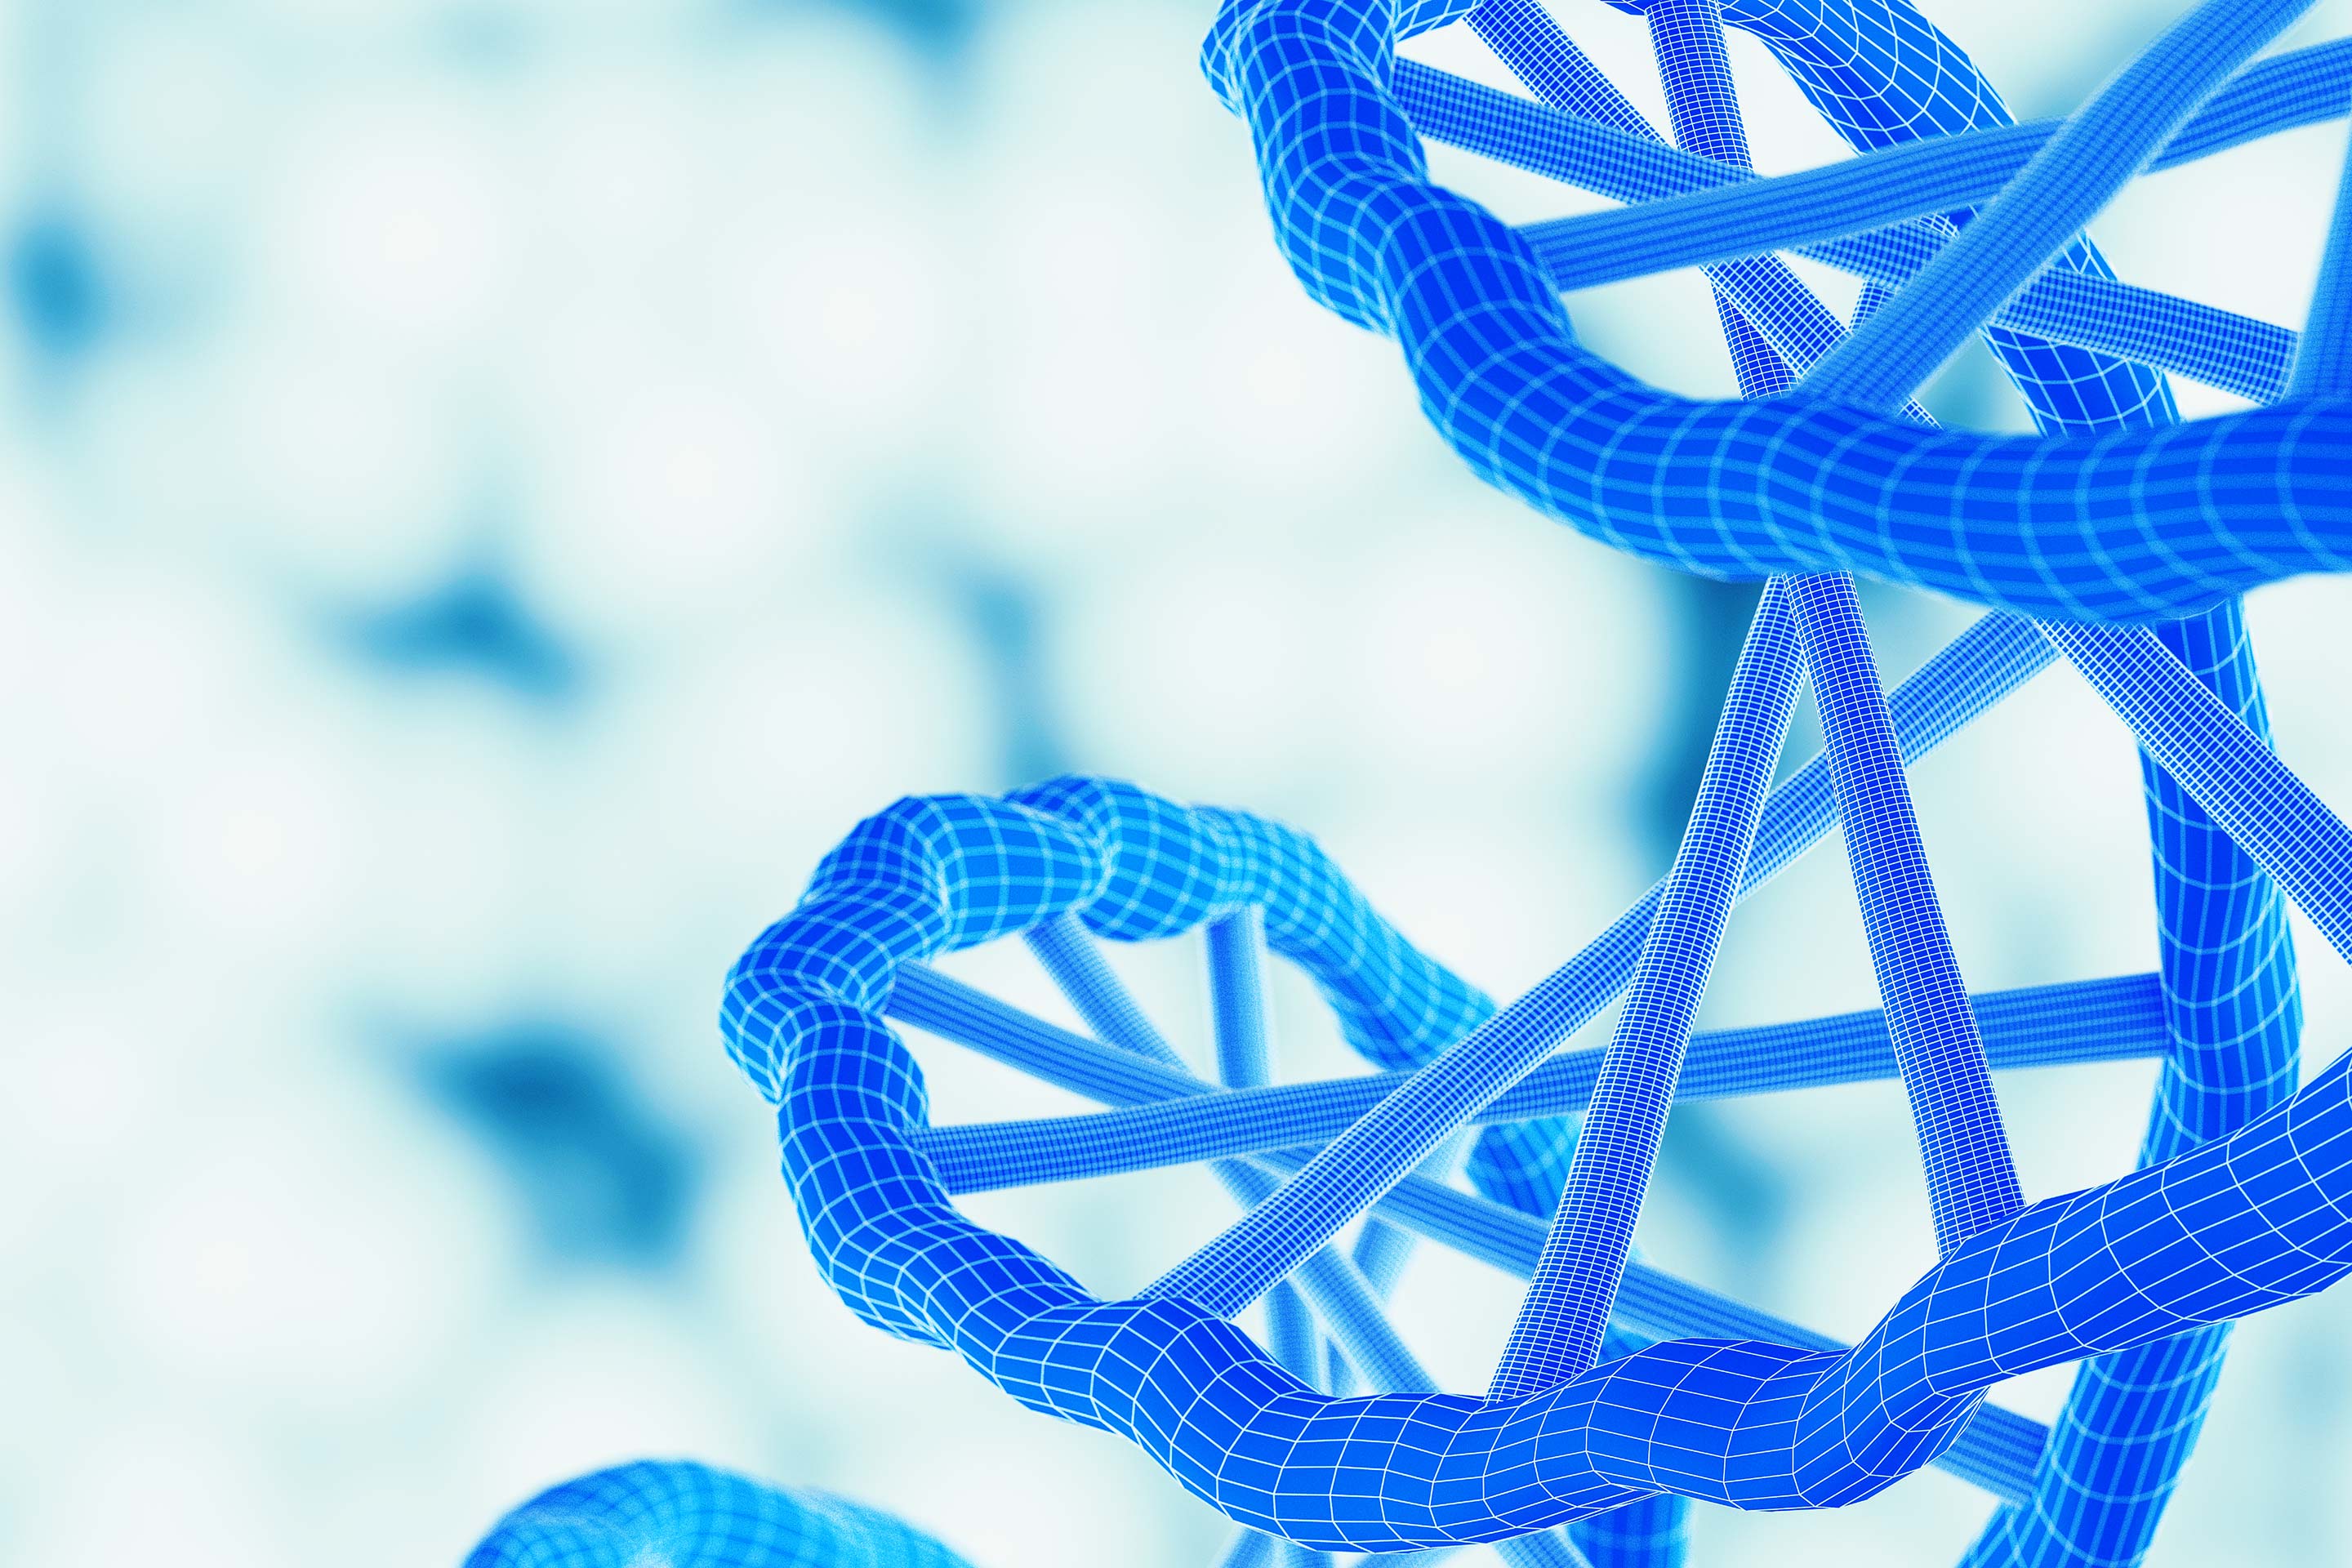 A blue double helix DNA strand representing an ecosystem